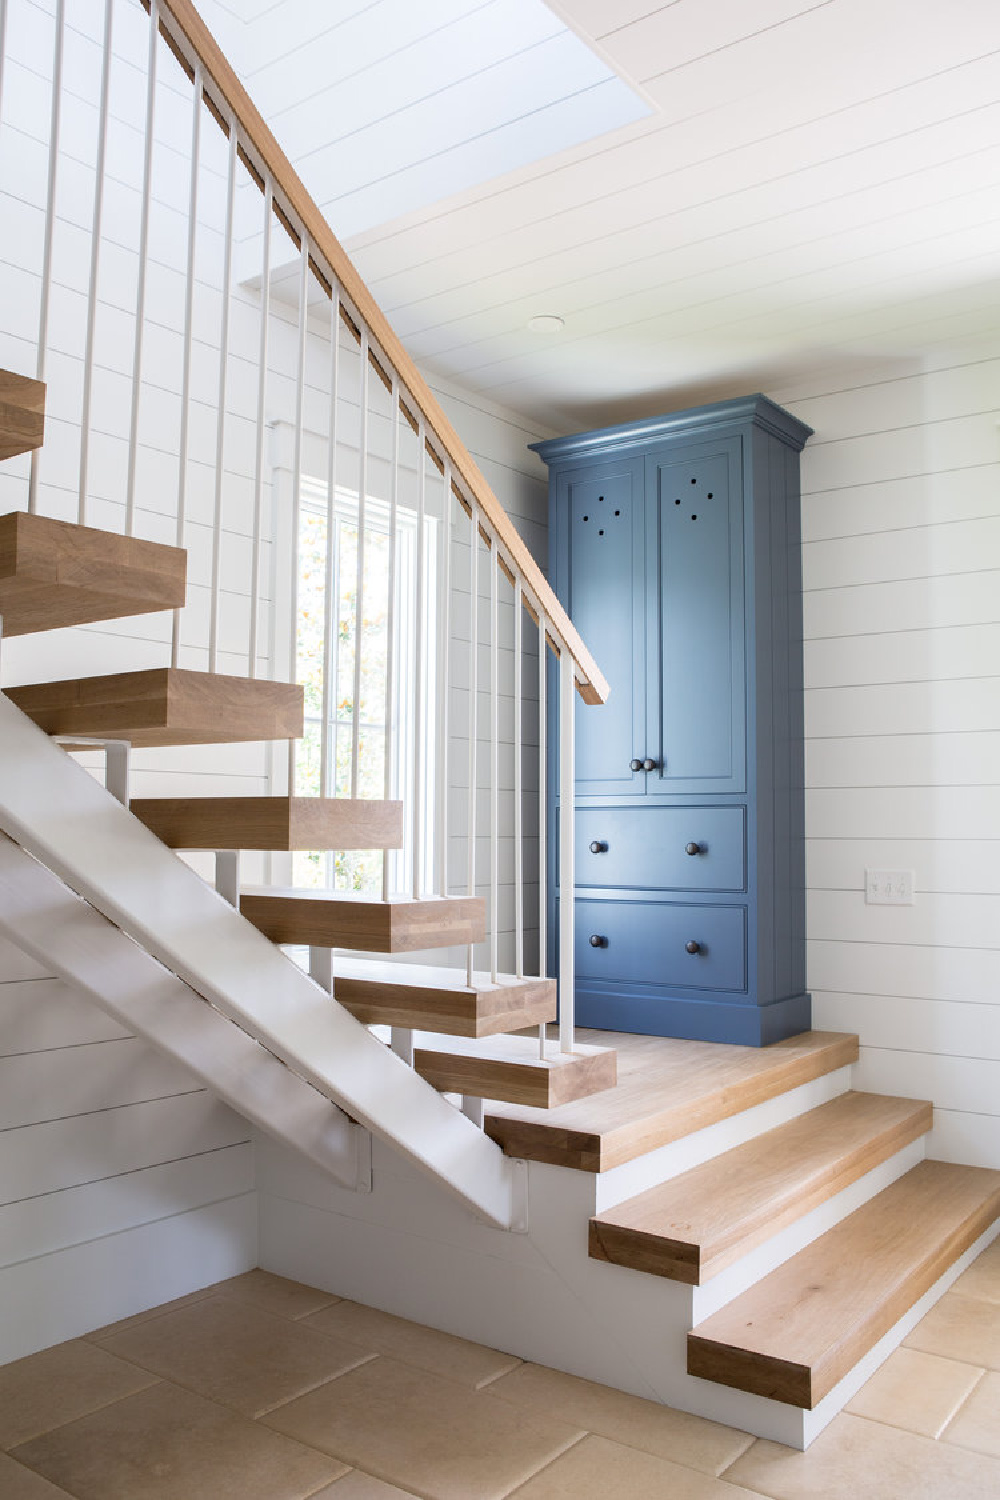 White oak staircase, shiplap, and blue built-in in entry. Board and batten coastal cottage in Palmetto Bluff with modern farmhouse interior design by Lisa Furey. #entry #shiplap #coastalcottage #blueandwhite #interiordesign